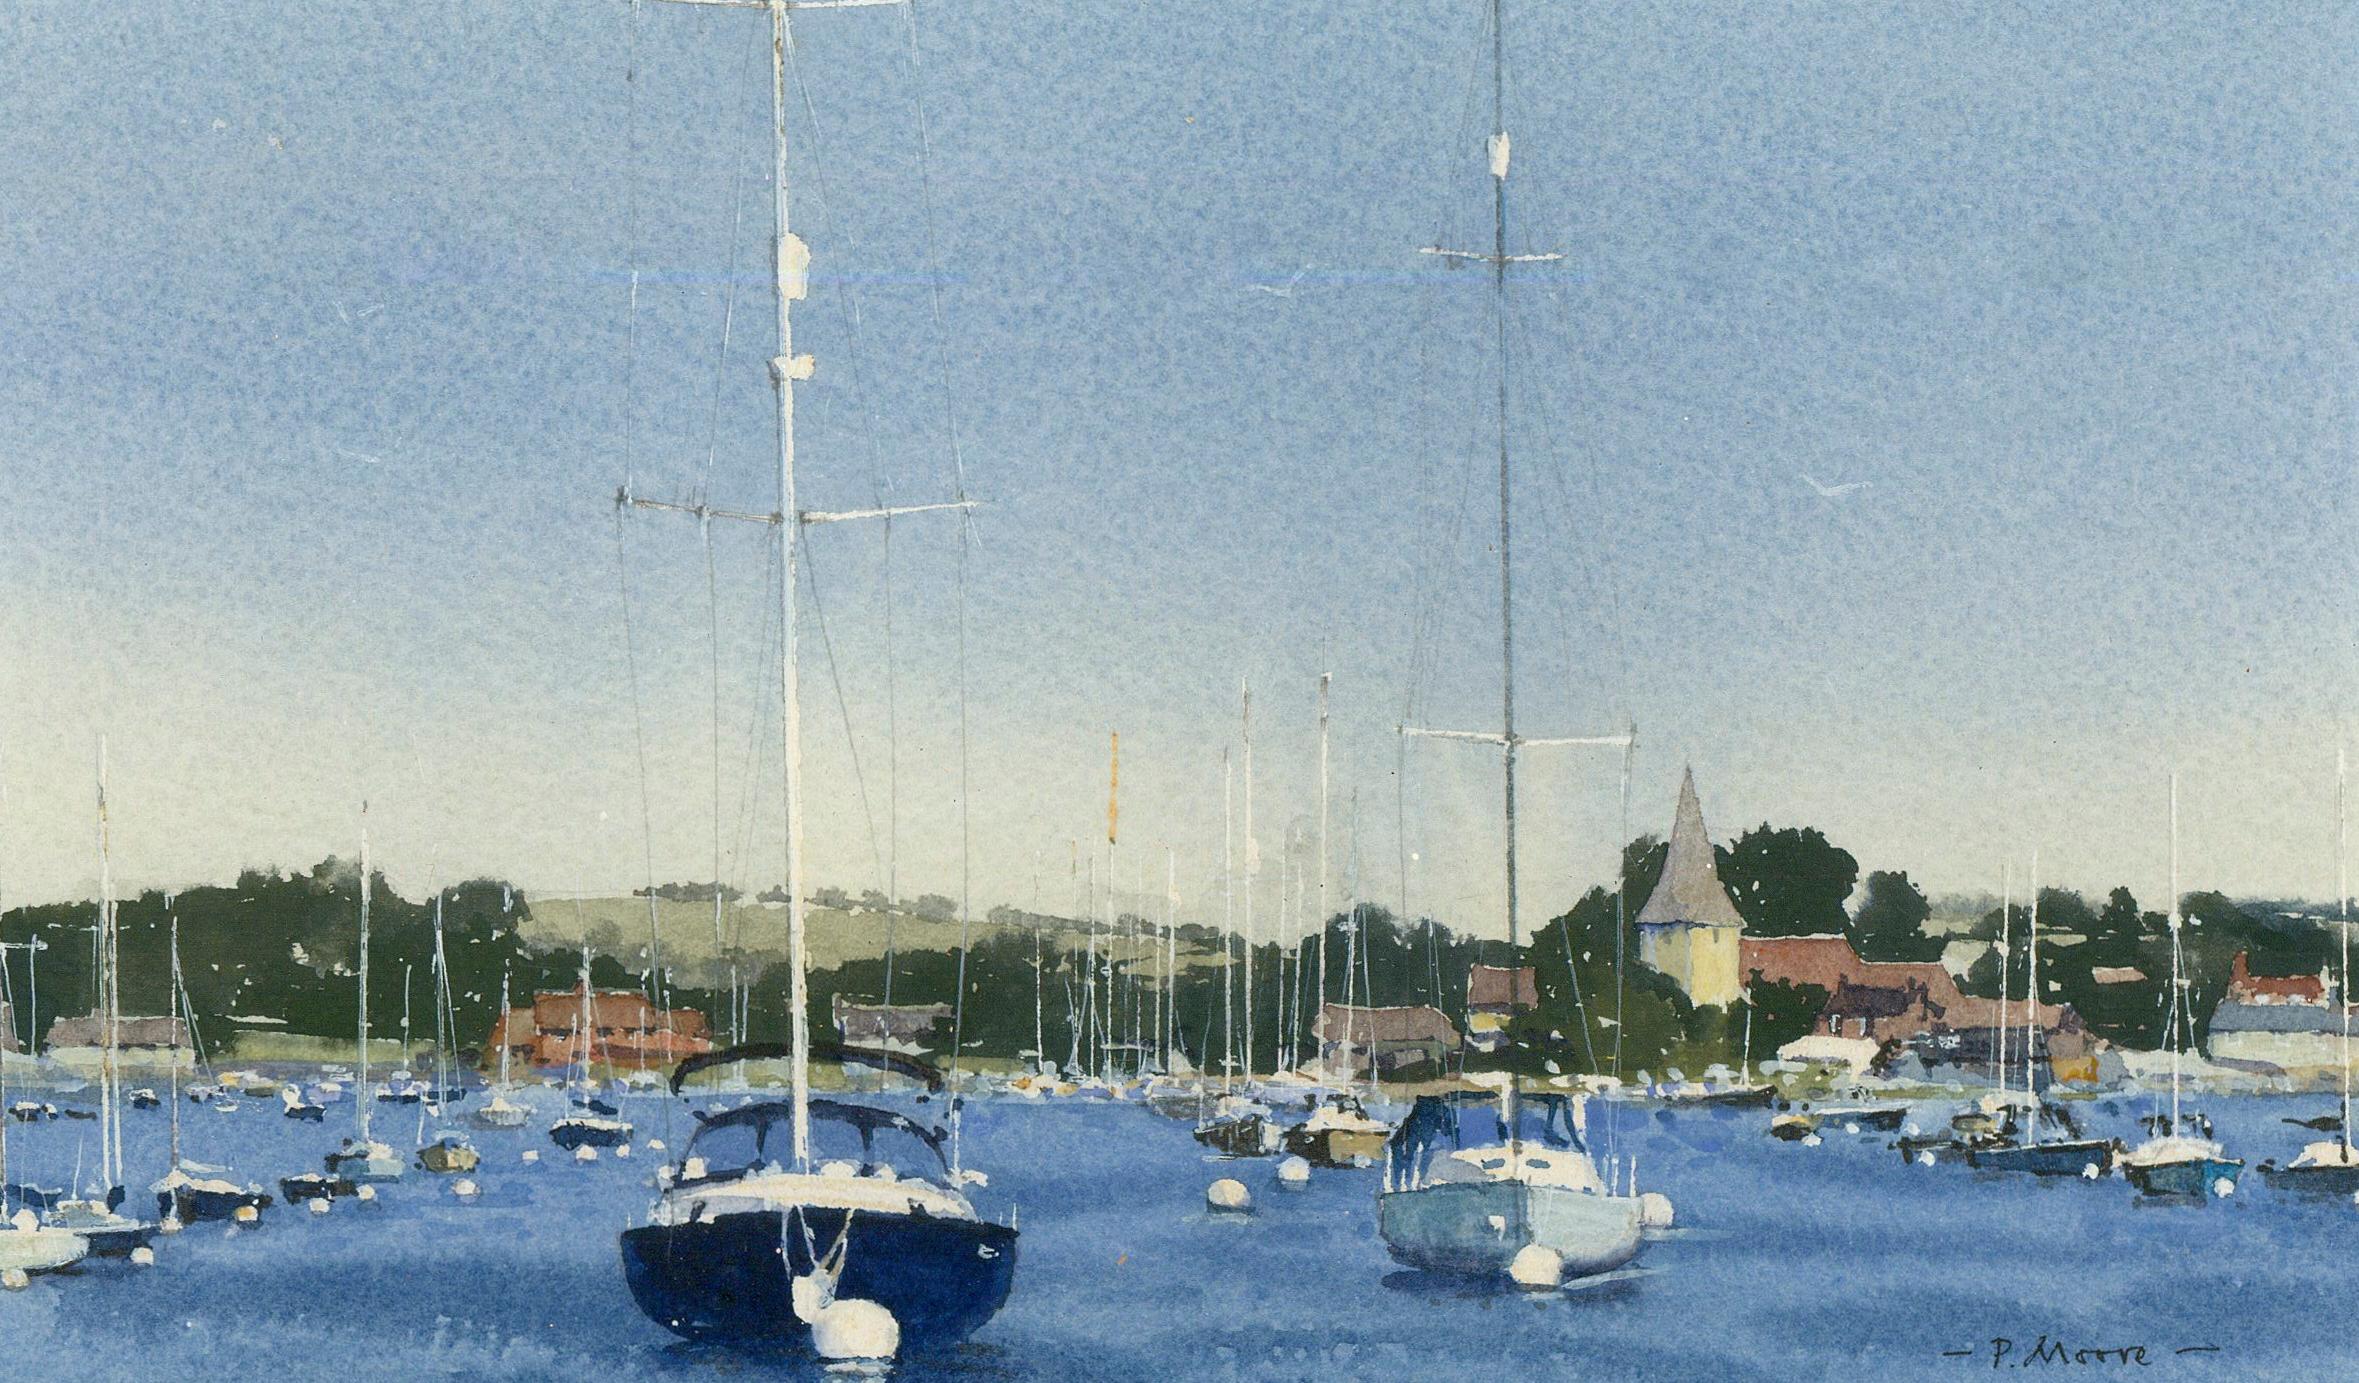 P. Moore - Framed Contemporary Watercolour, A Busy Mooring - Art by Unknown